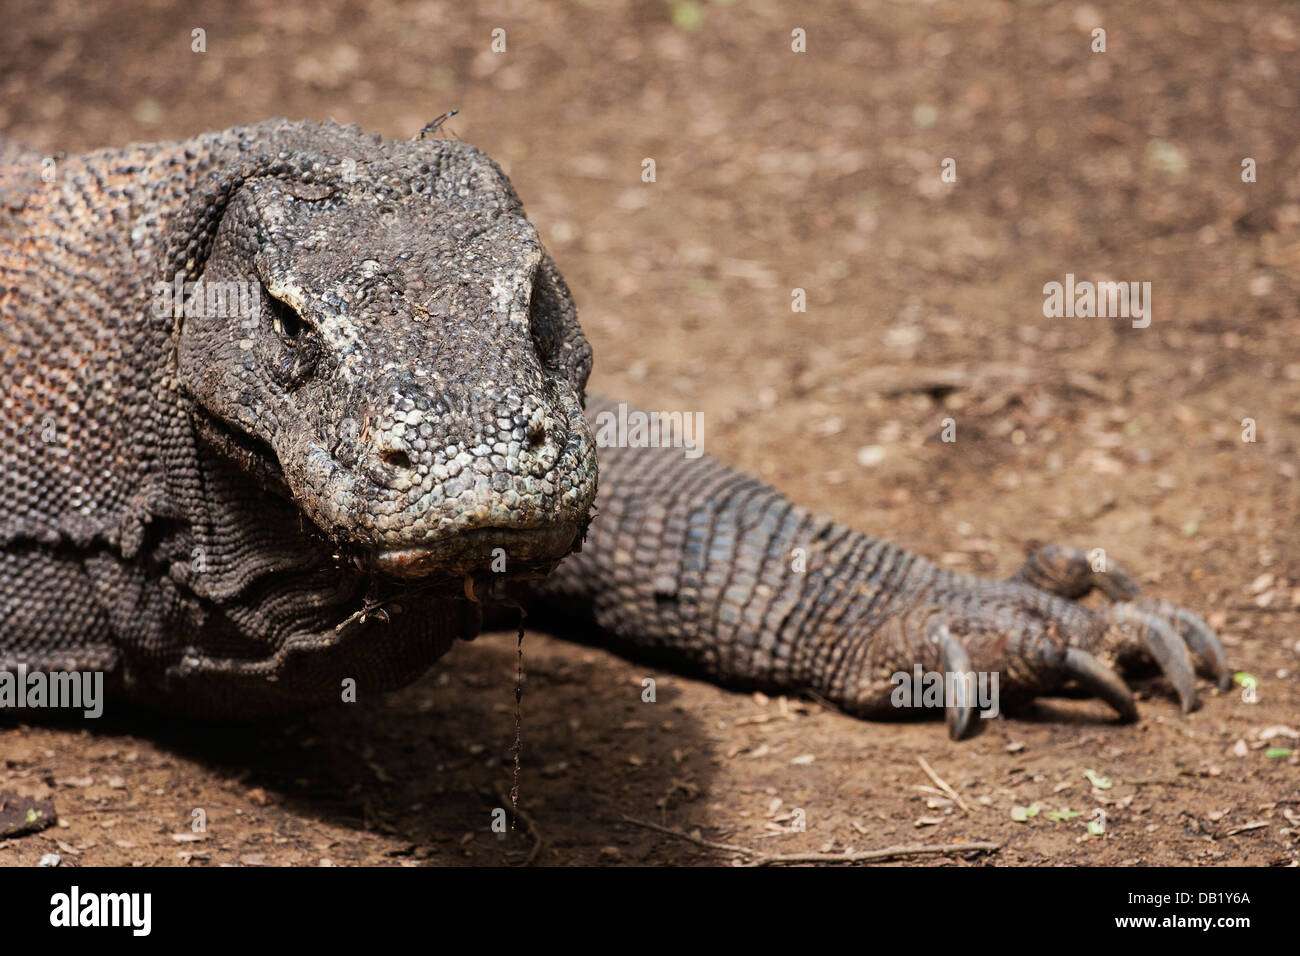 Komodo dragon crawling into the picture Stock Photo